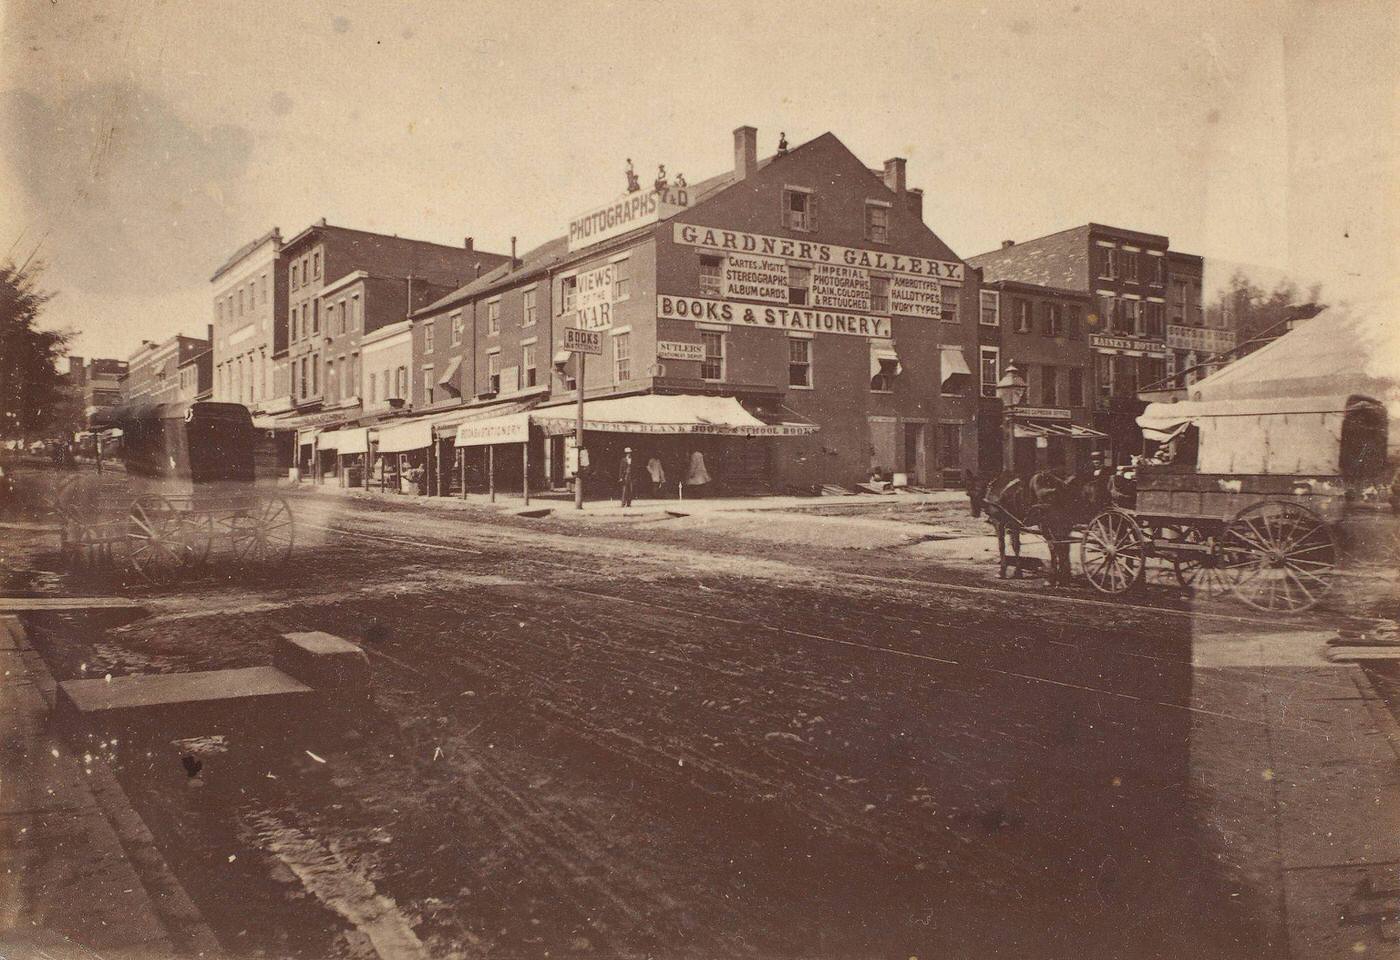 Gardner's Gallery, 7th and D Streets, Washington, D.C., 1864